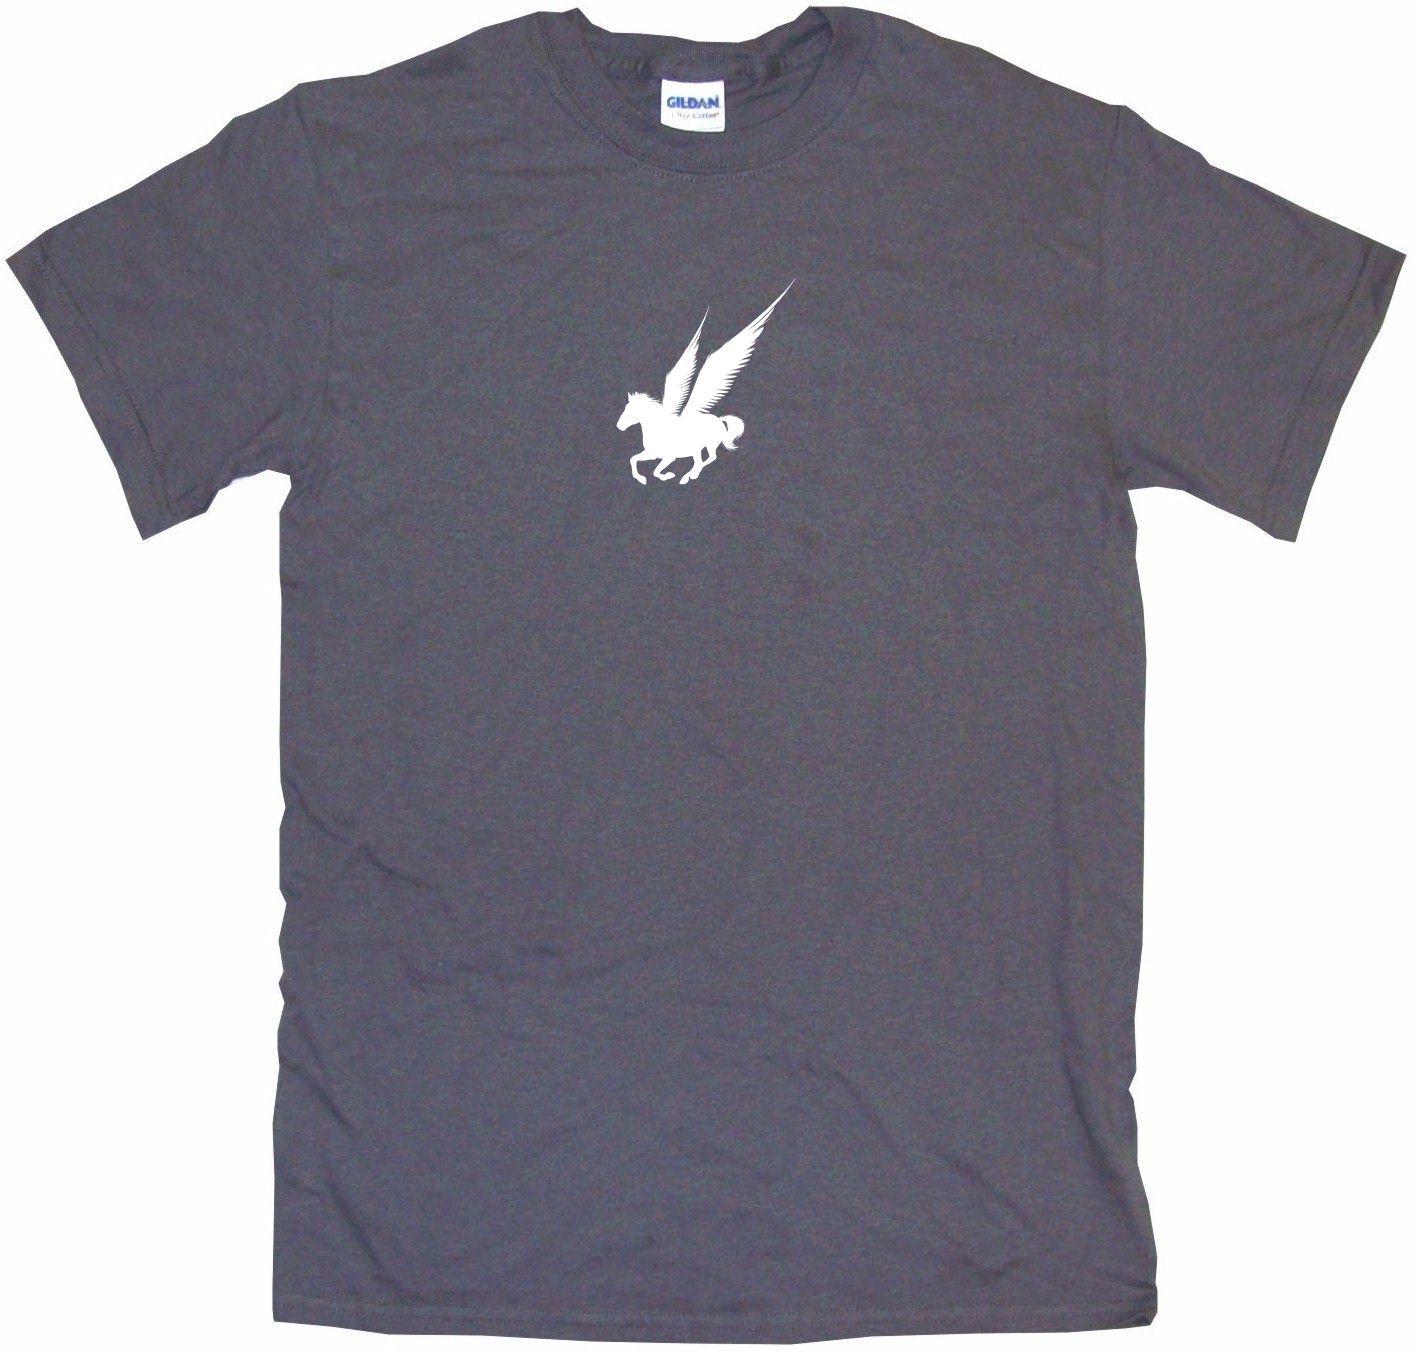 Horse with Wings Logo - Pegasus Horse With Wings Logo Kids Tee Shirt Boys Girls Unisex 2T XL